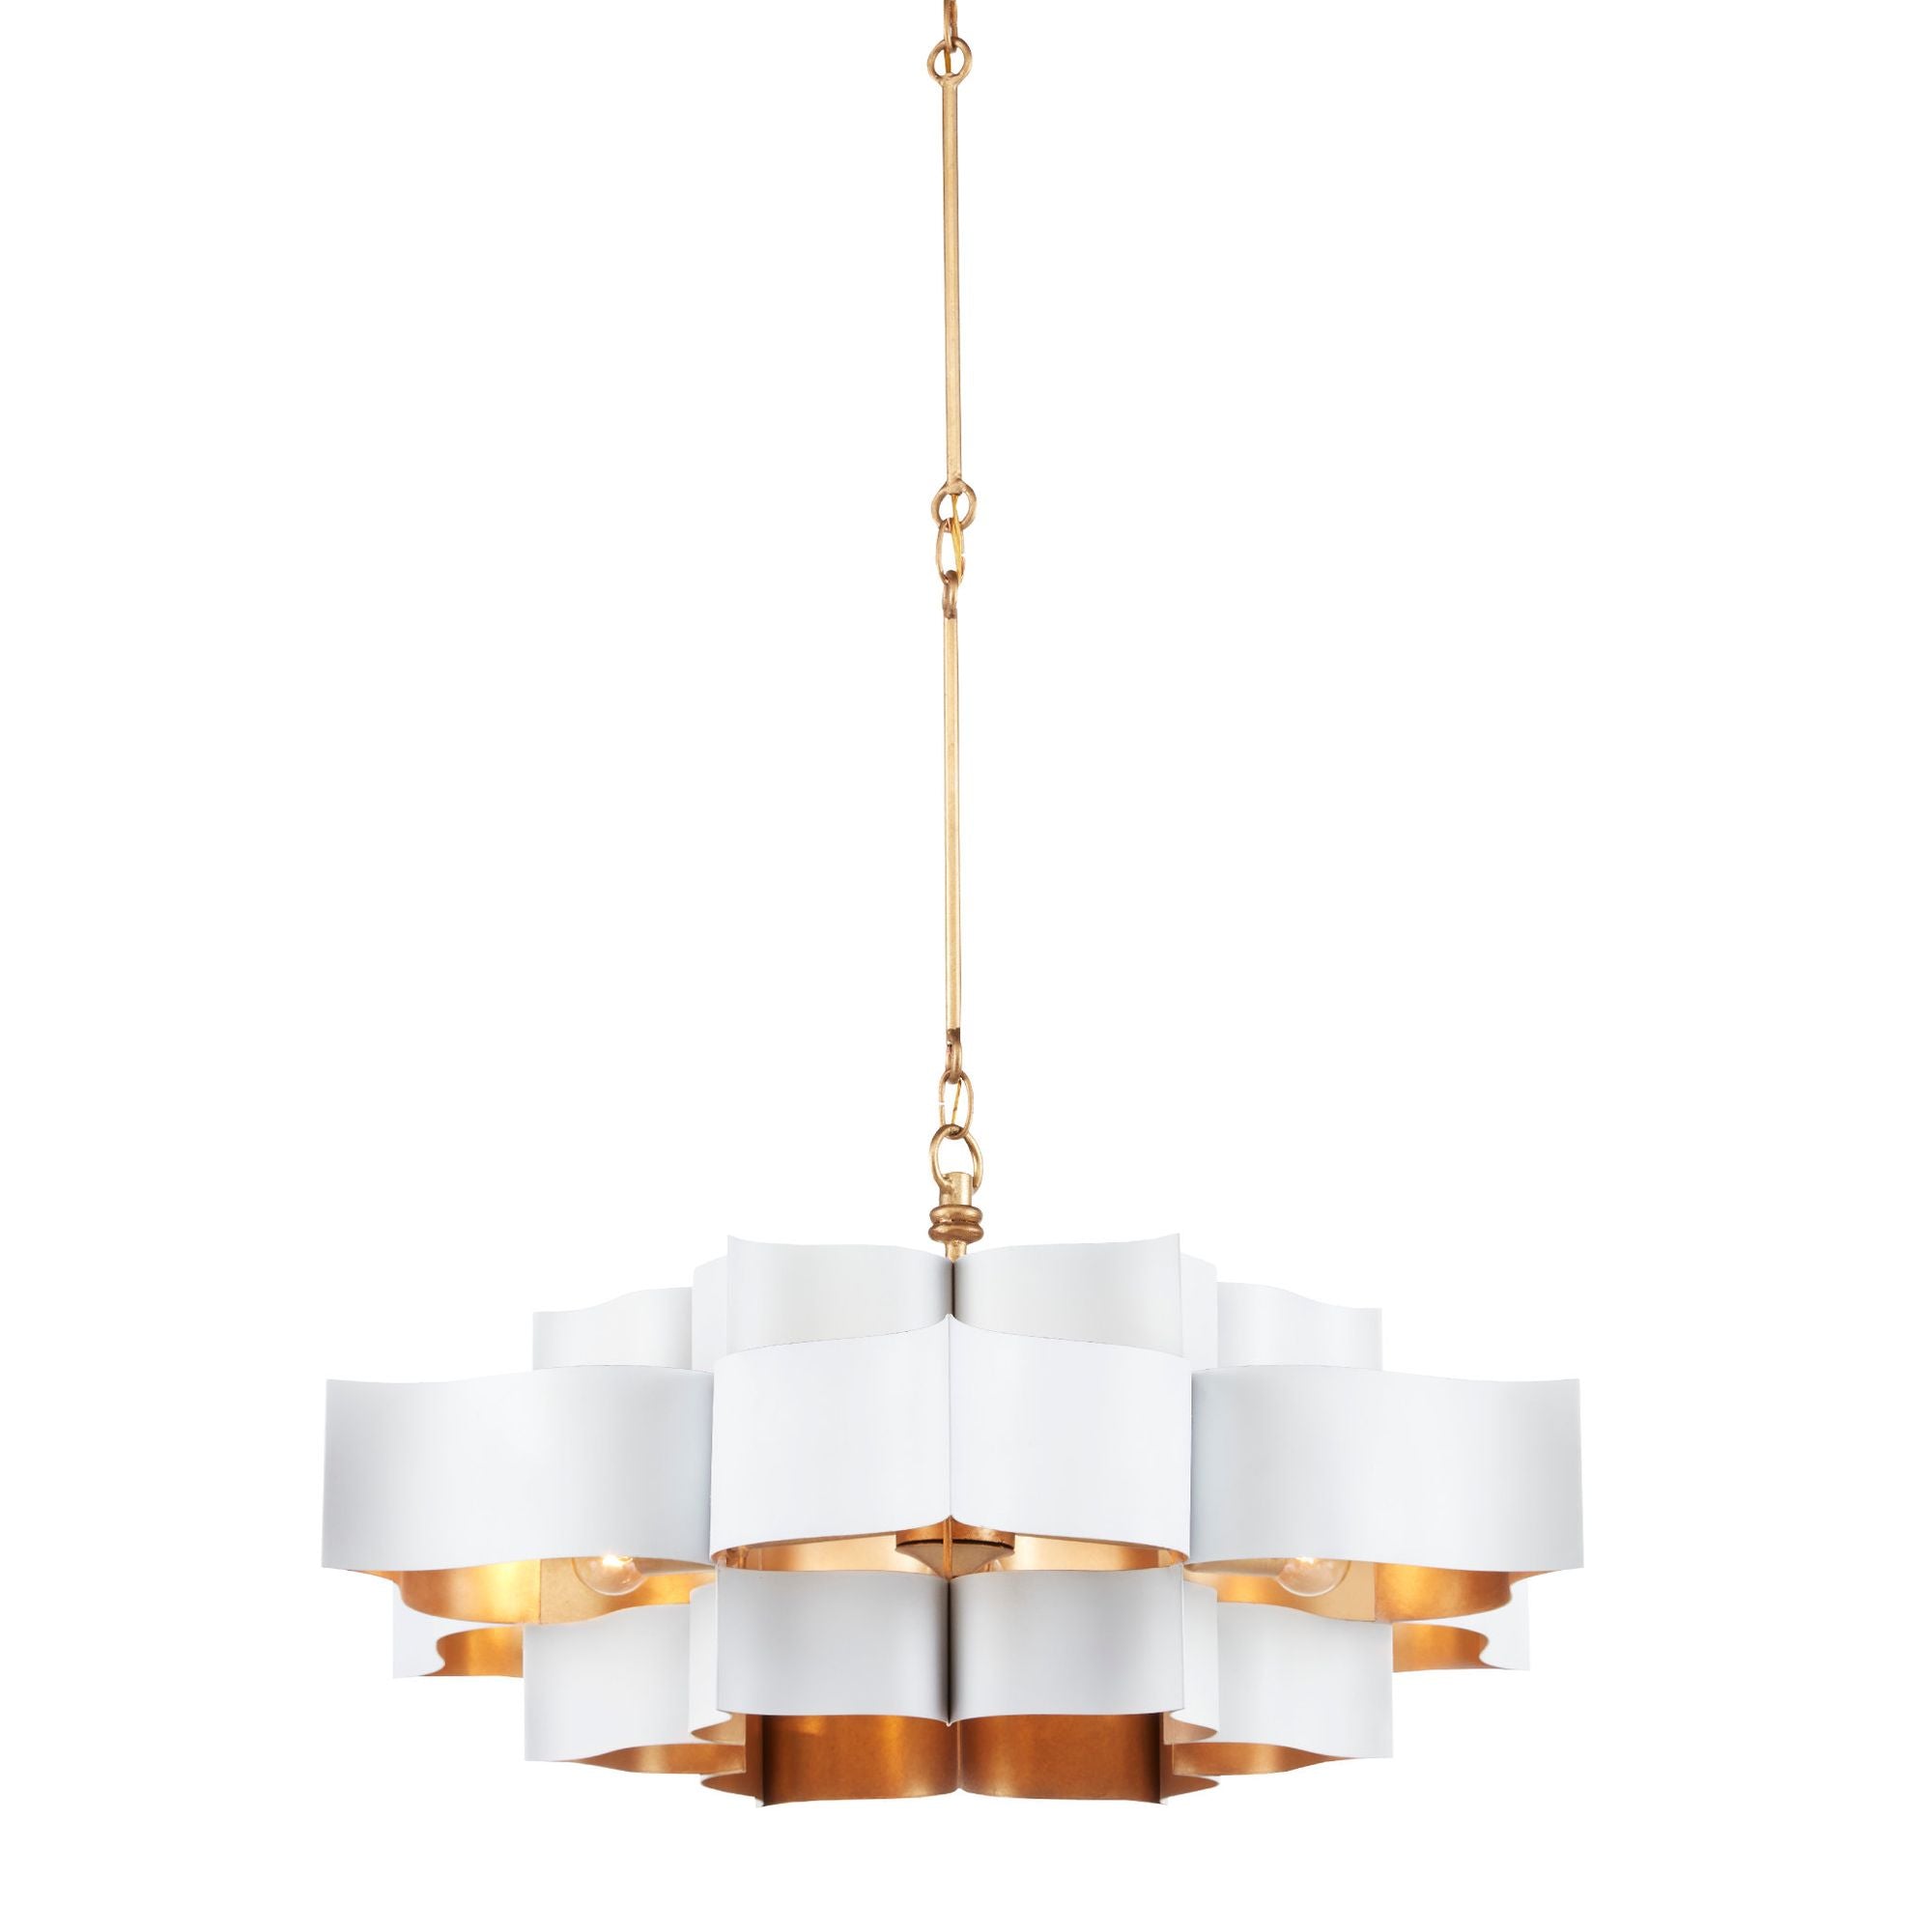 Grand Lotus Large White Chandelier - Sugar White/Contemporary Gold Leaf